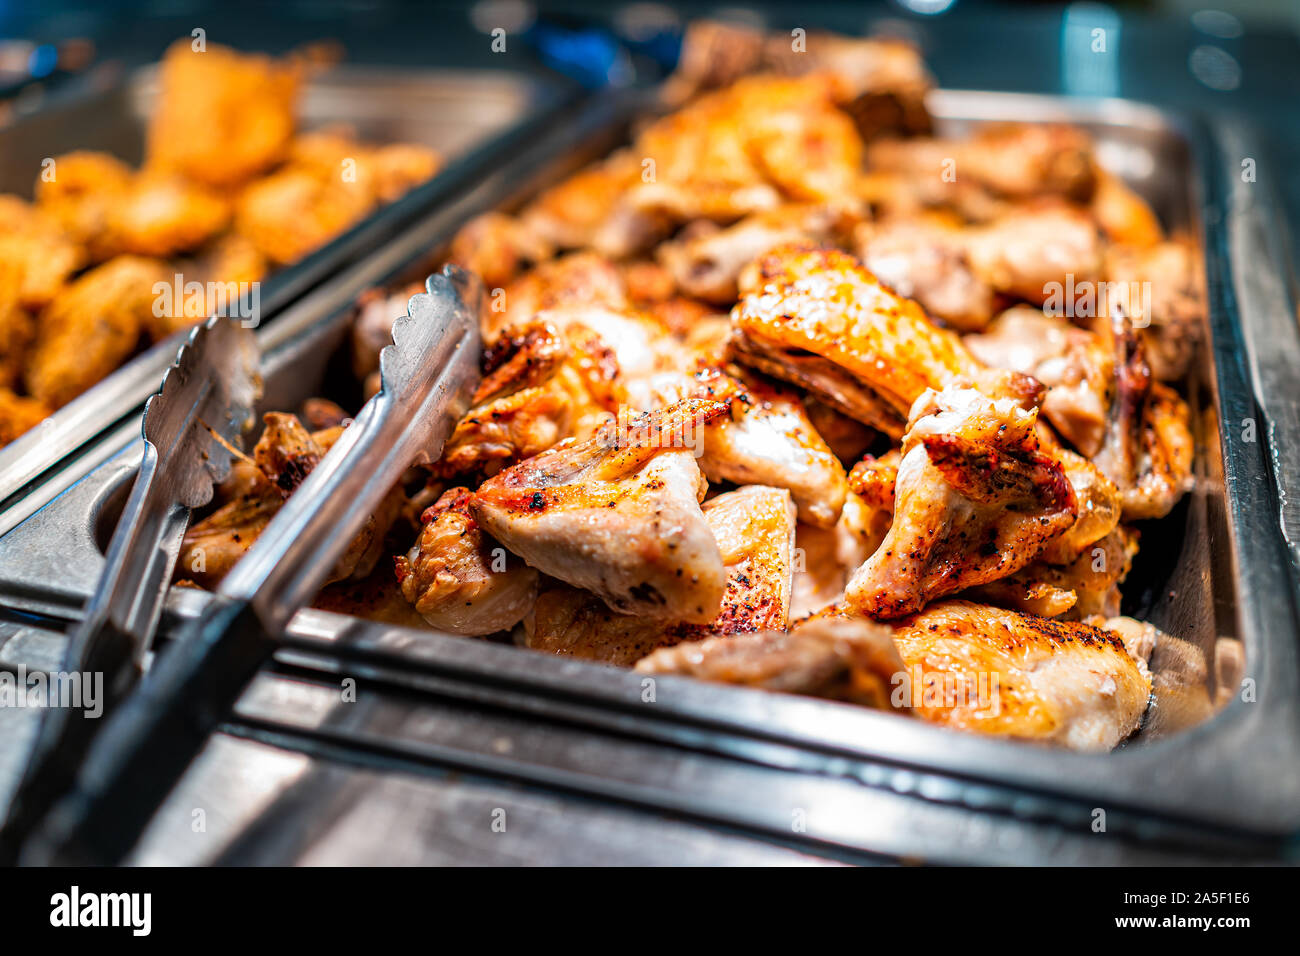 Roasted chicken wings buffet bar self serve with tongs in grocery store, restaurant or catering event with crisp skin and unhealthy food Stock Photo